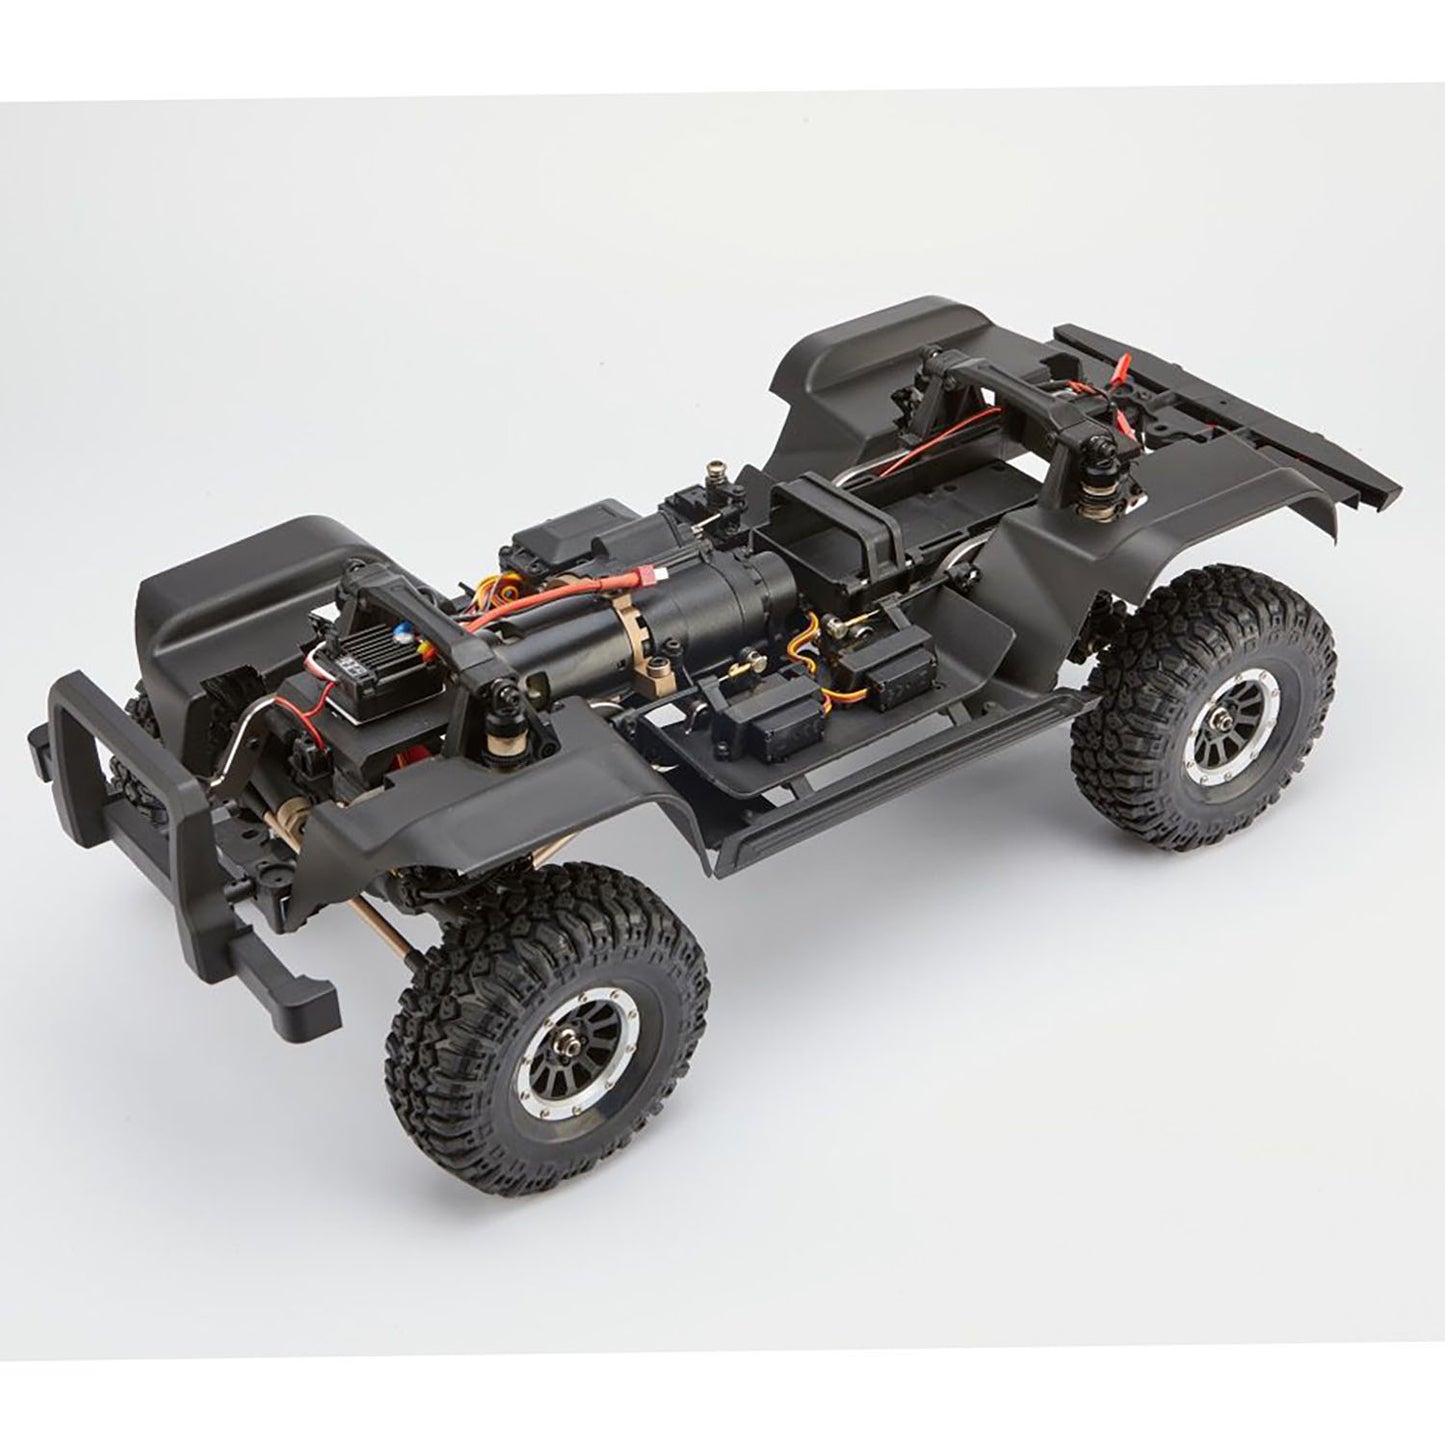 IN STOCK 1/10 YIKONG 4x4 Painted RC Crawler Remote Controlled Off Road Car 2Speed Radio Motor ESC Servo DIY Vehicle Models